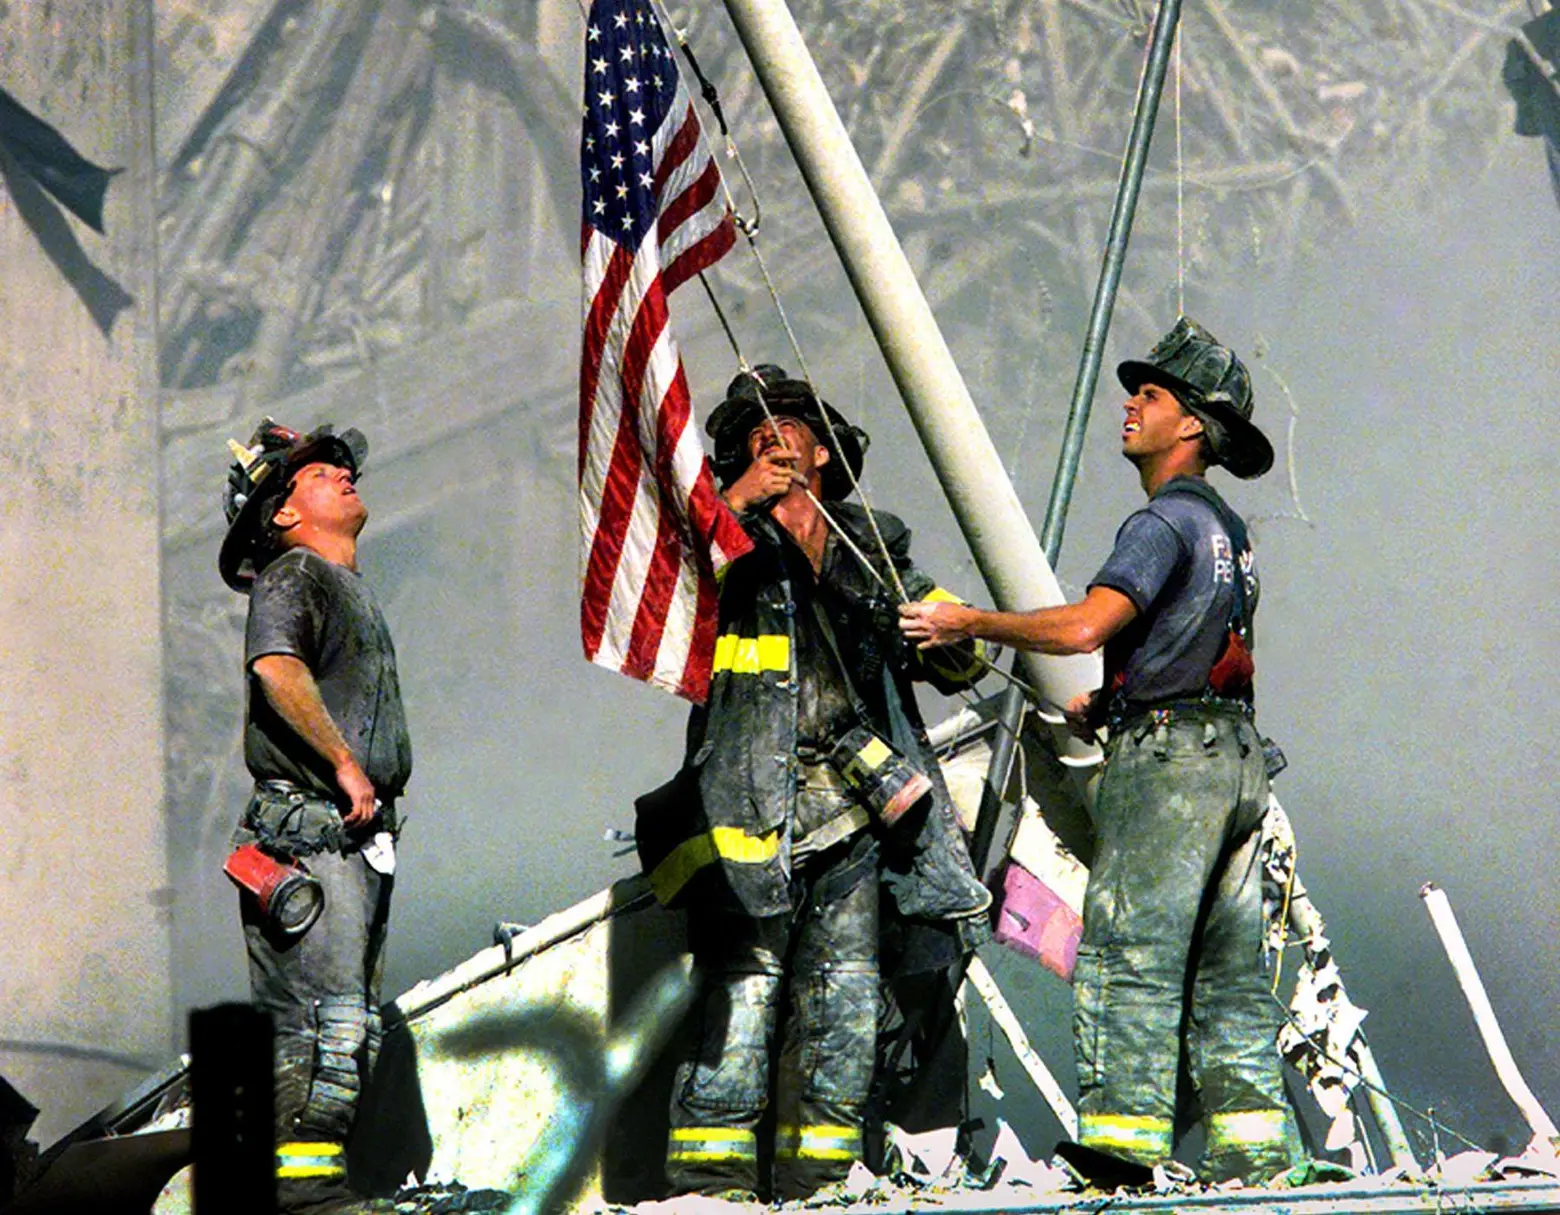 Missing 9/11 flag returns to Ground Zero site after 15 years